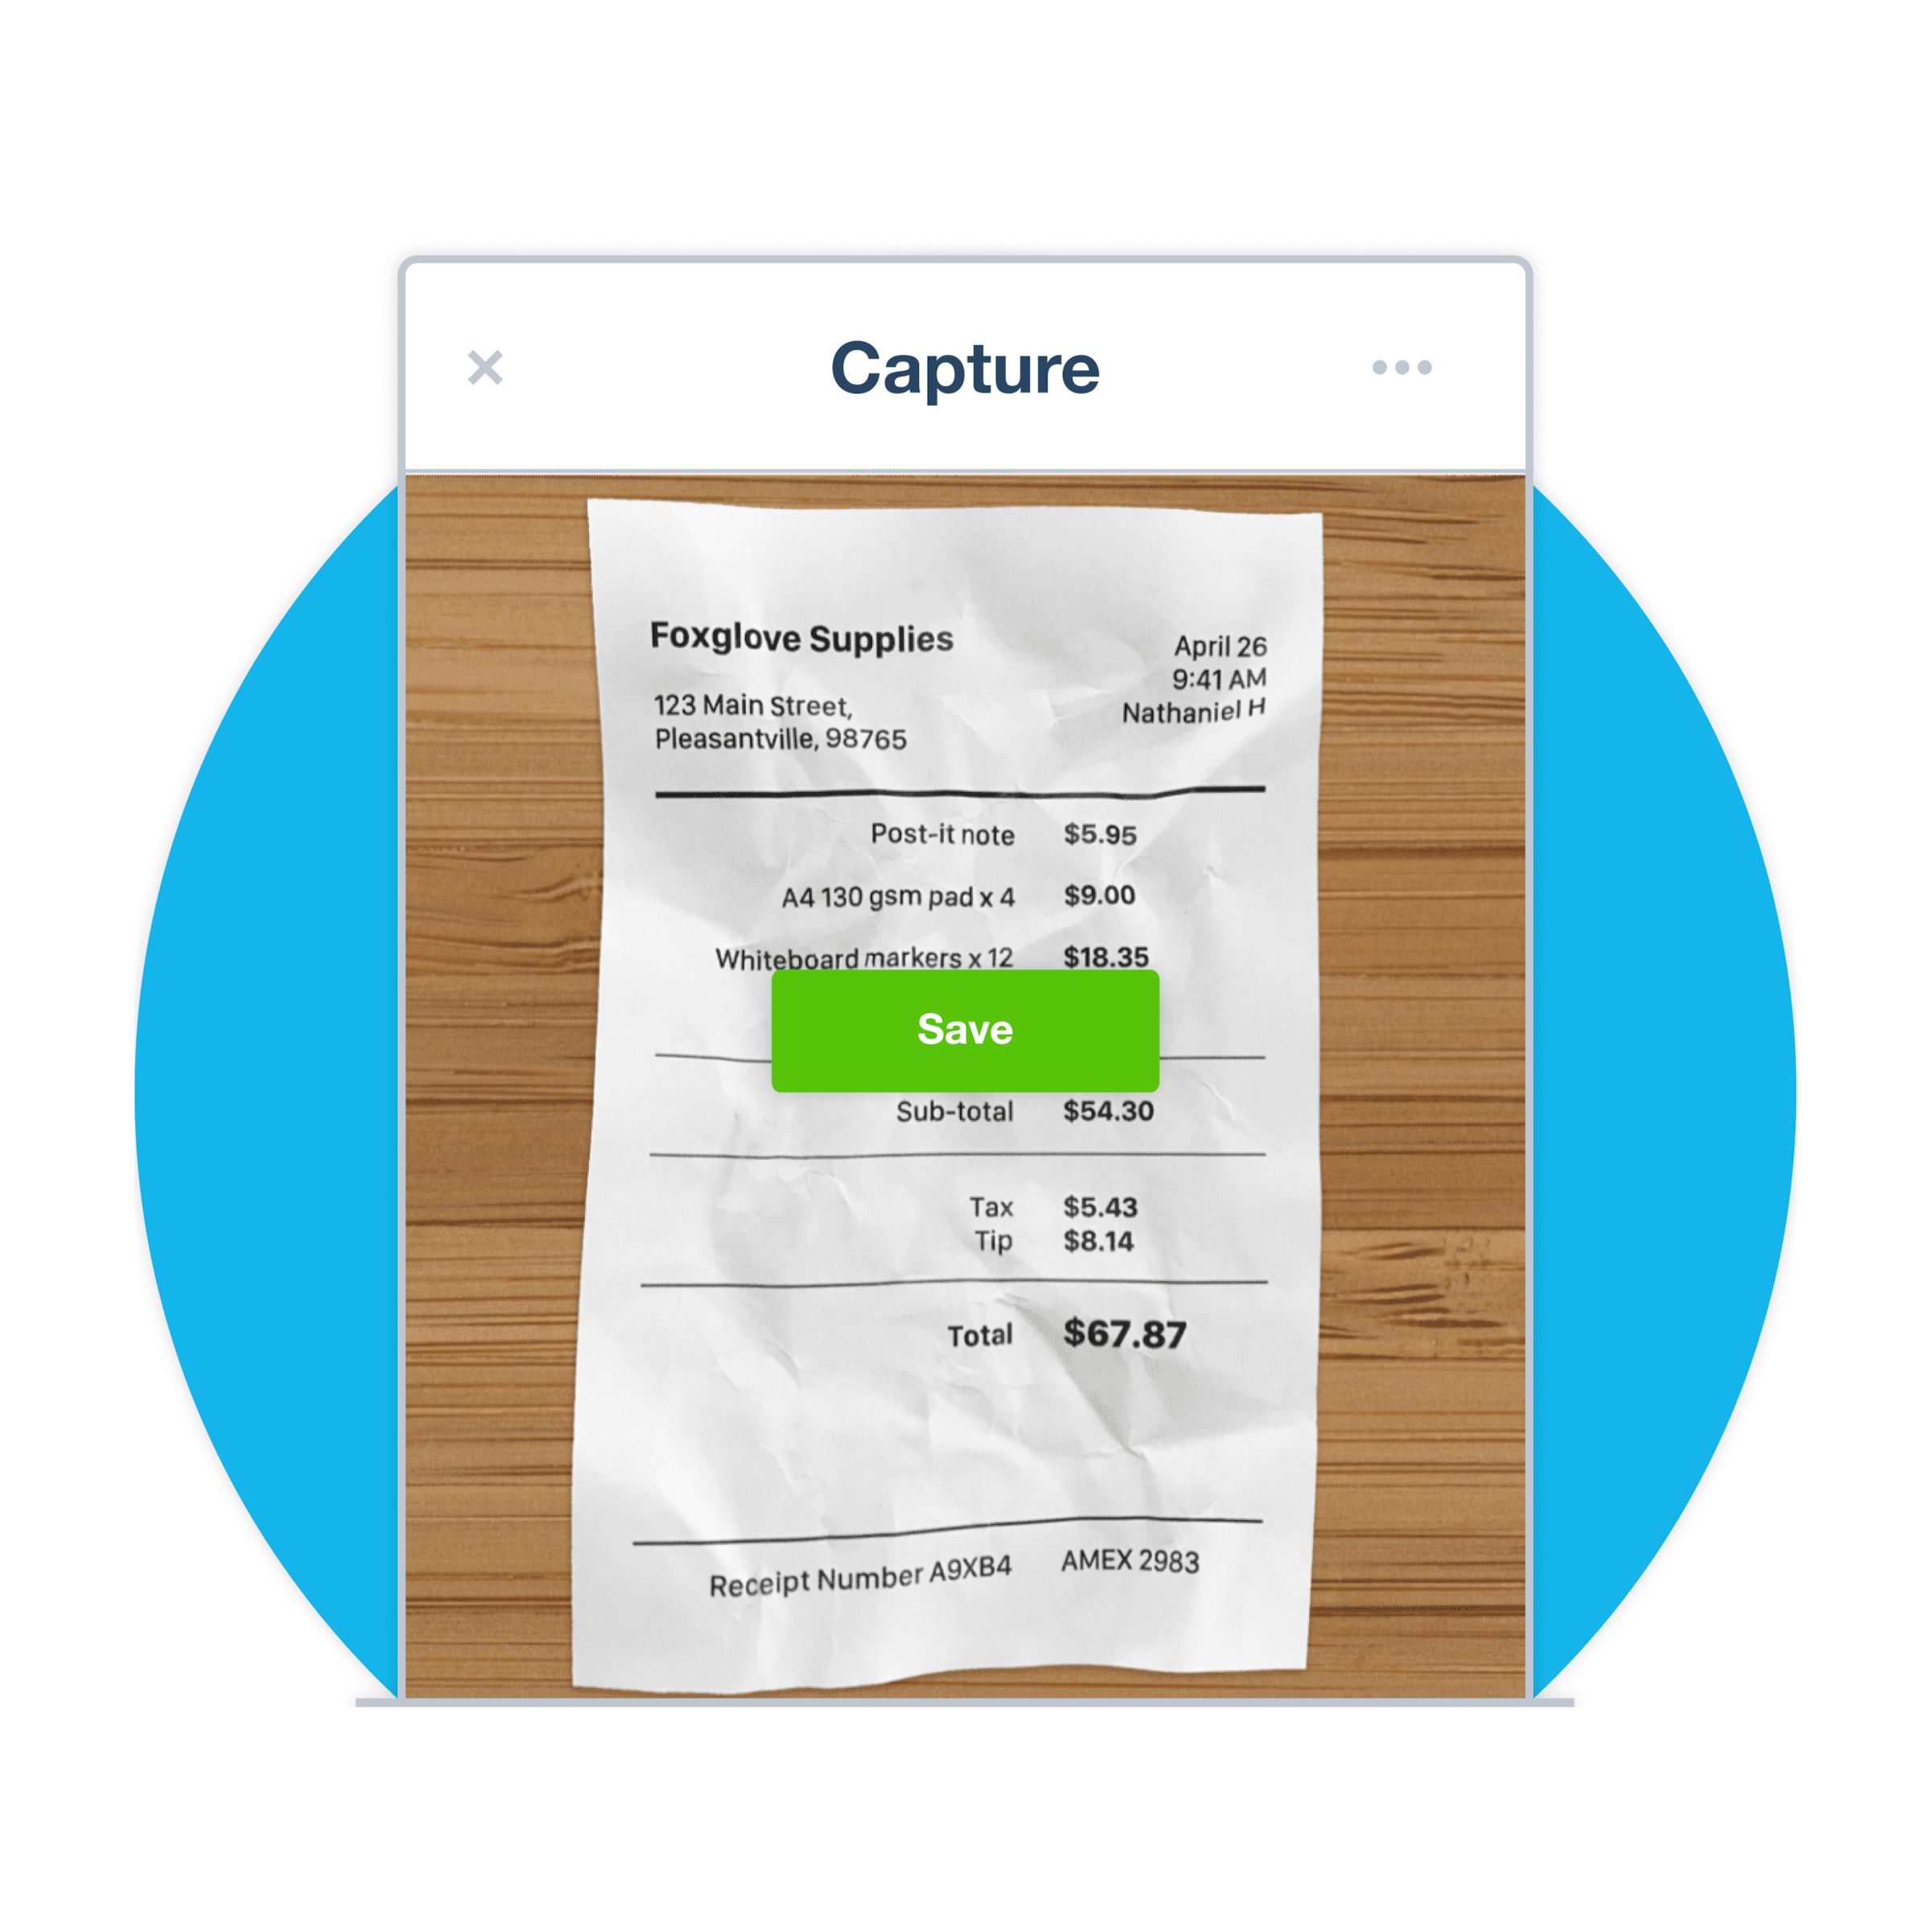 The capture receipt screen displays the save button to save scanned receipts.